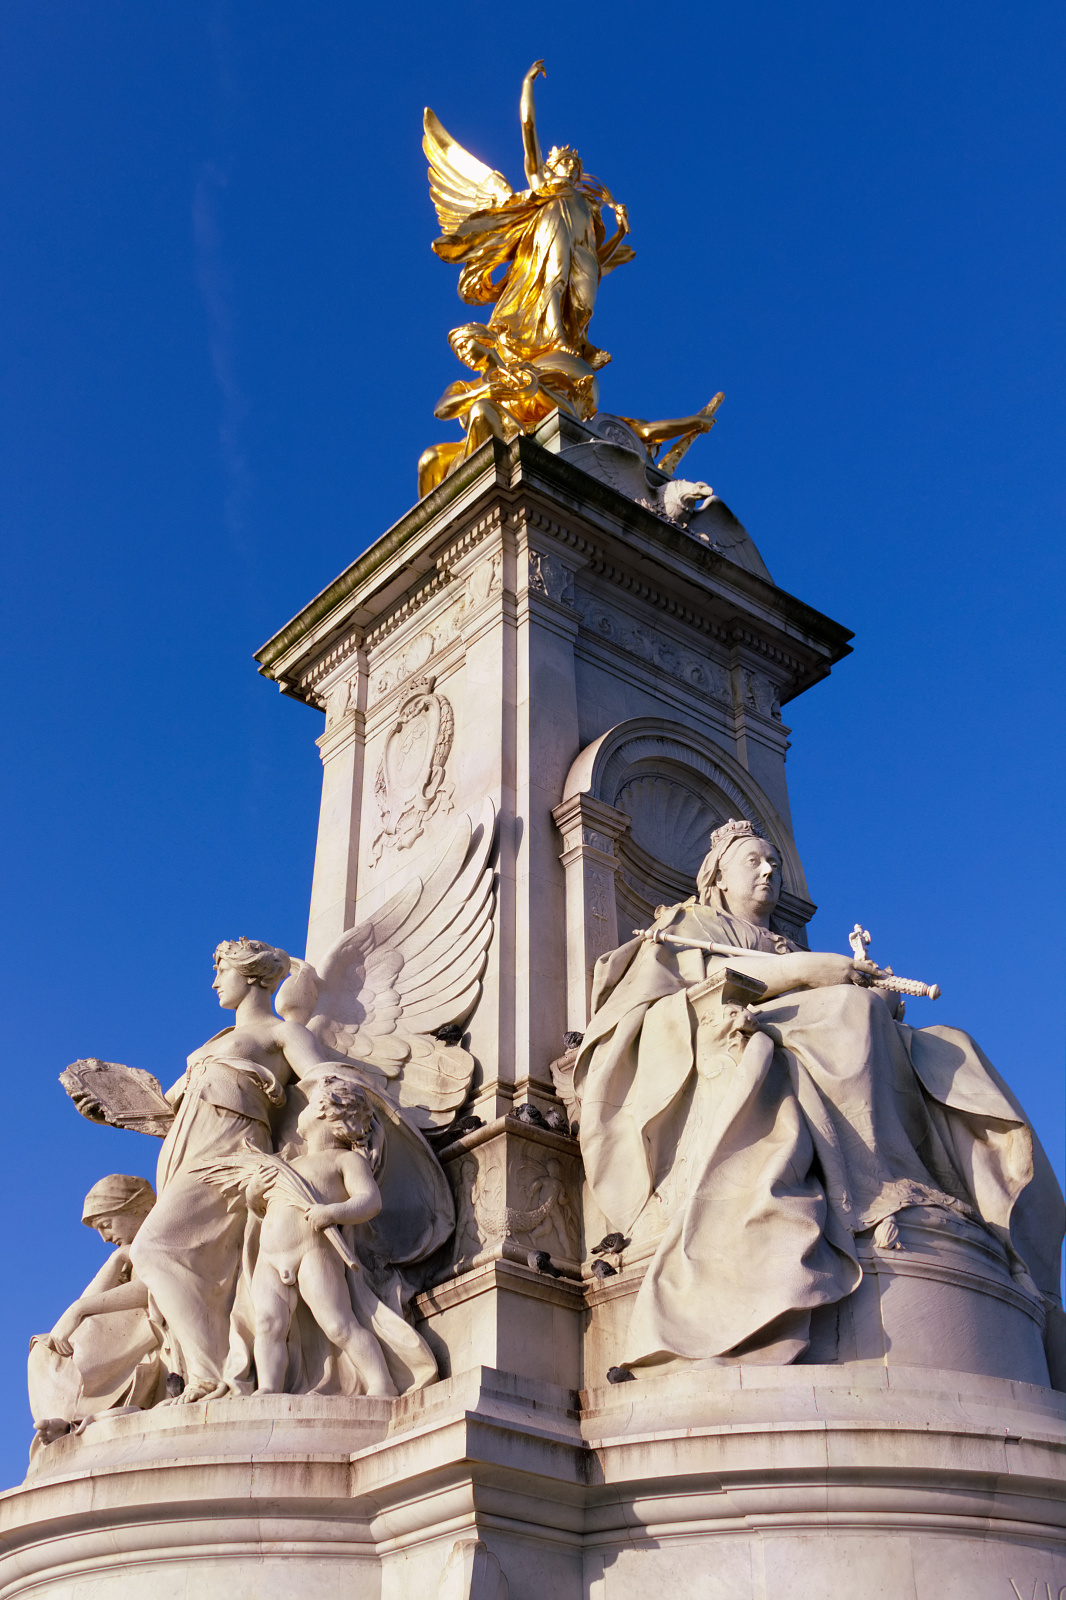 Queen Victoria Memorial (Travels » London » London at Day)